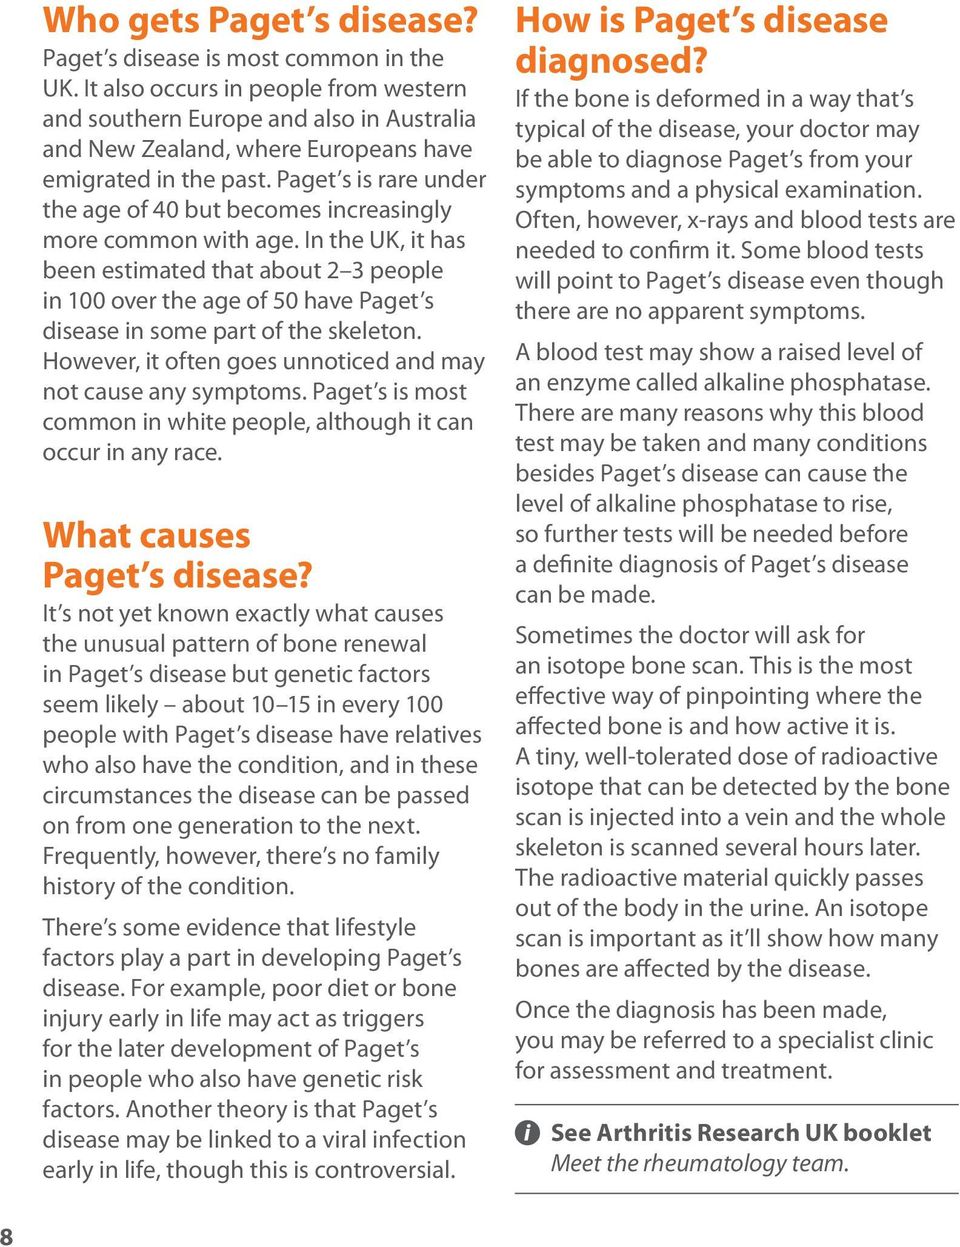 Paget s is rare under the age of 40 but becomes increasingly more common with age.